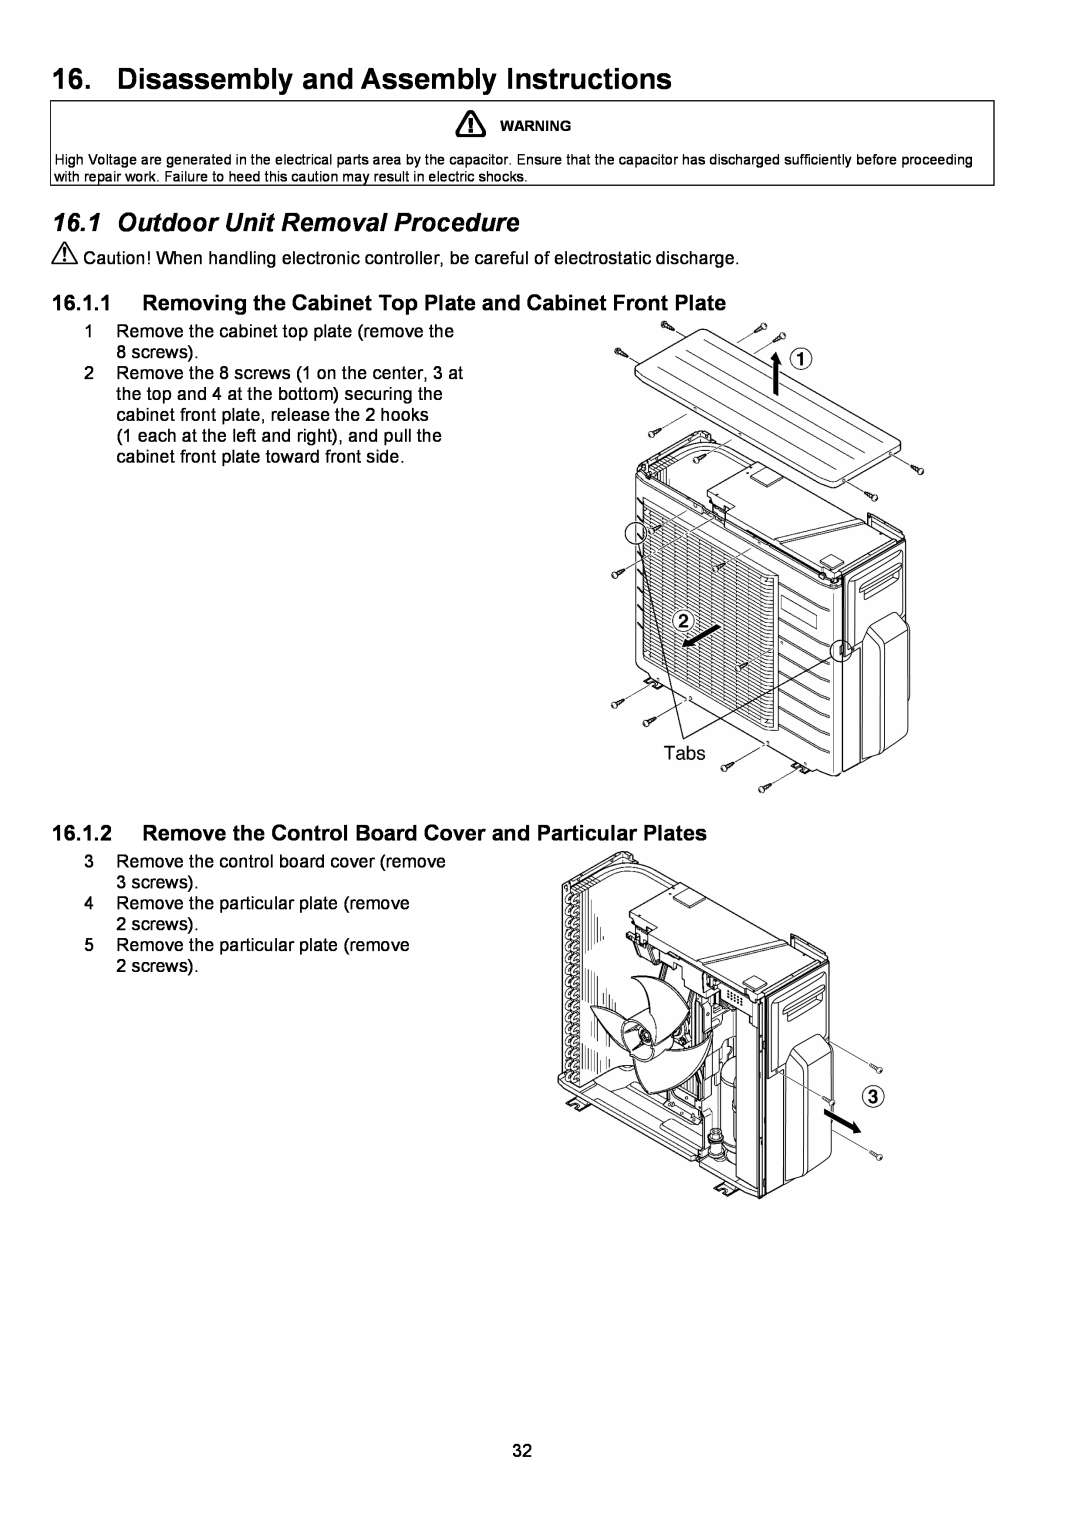 Panasonic CU-2E18NBU service manual Disassembly and Assembly Instructions, Outdoor Unit Removal Procedure 